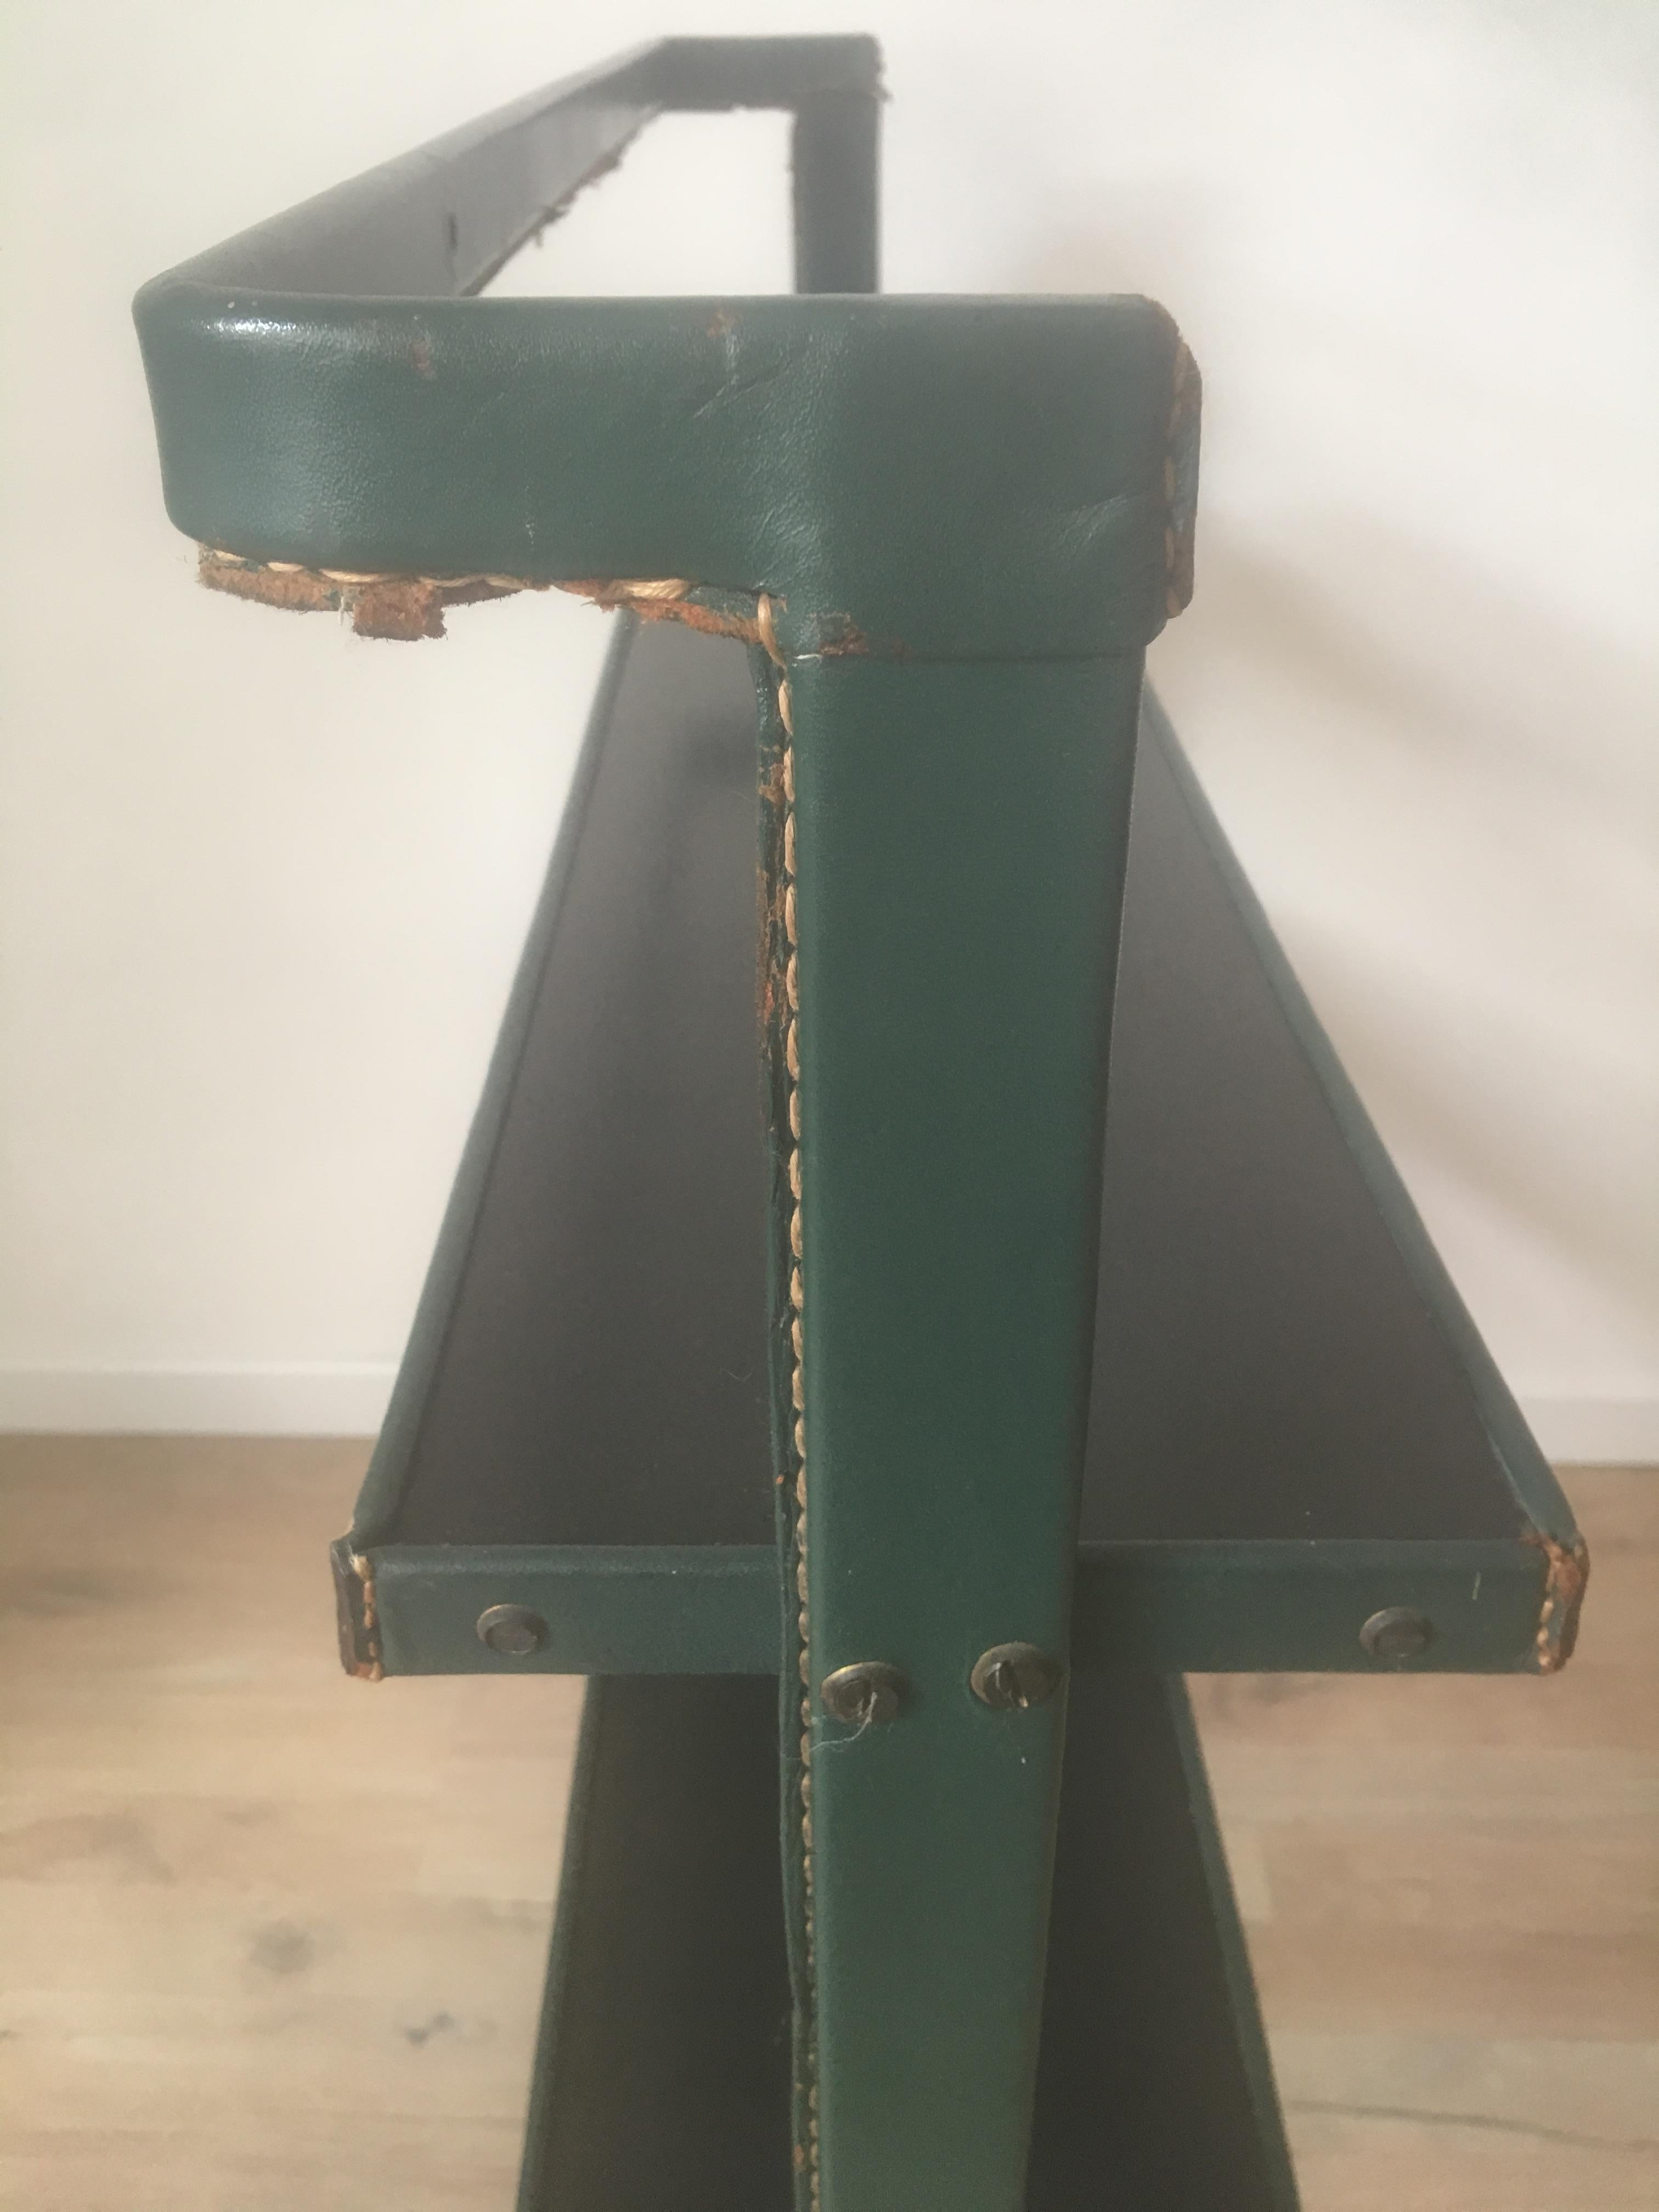 Jacques Adnet Original Green Stitched Leather Bookcase, 2 Shelves, French, 1950s For Sale 5